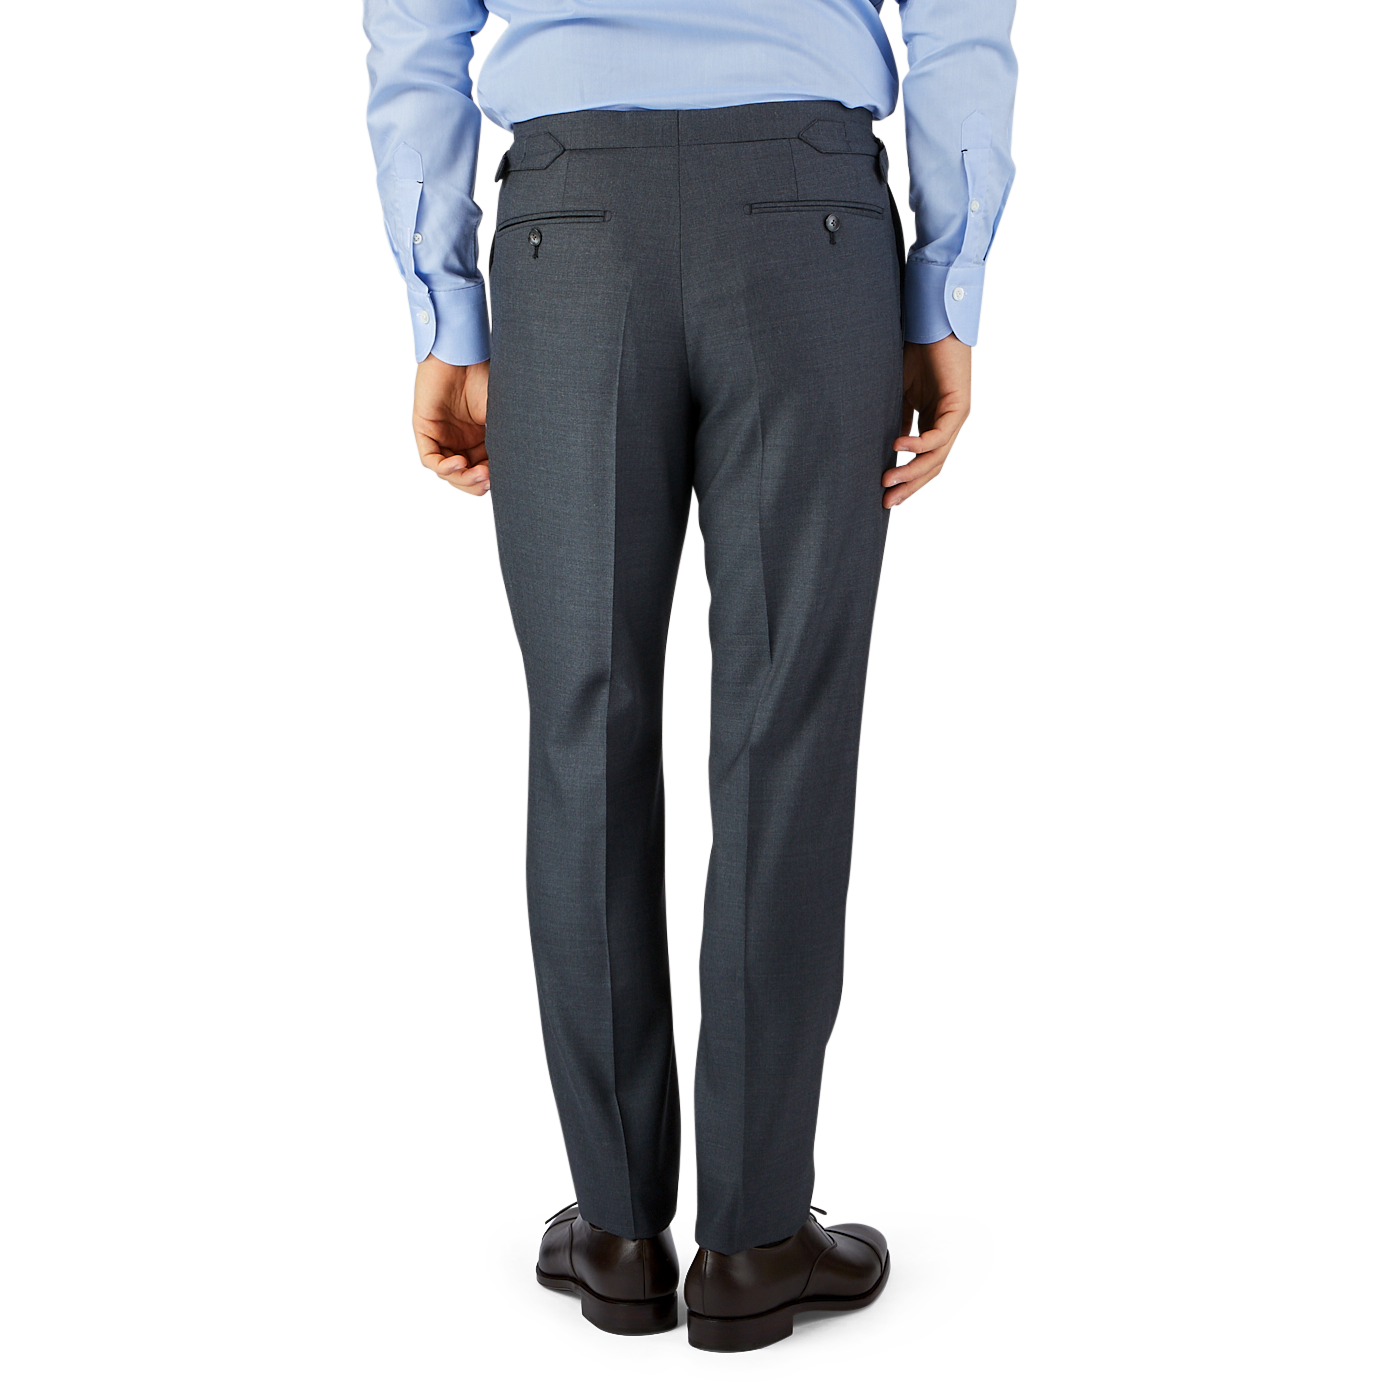 A man wearing a blue shirt and Grey Super 100's Wool Flat Front Suit Trousers by Baltzar Sartorial, standing on a black surface against a blue and gray background.